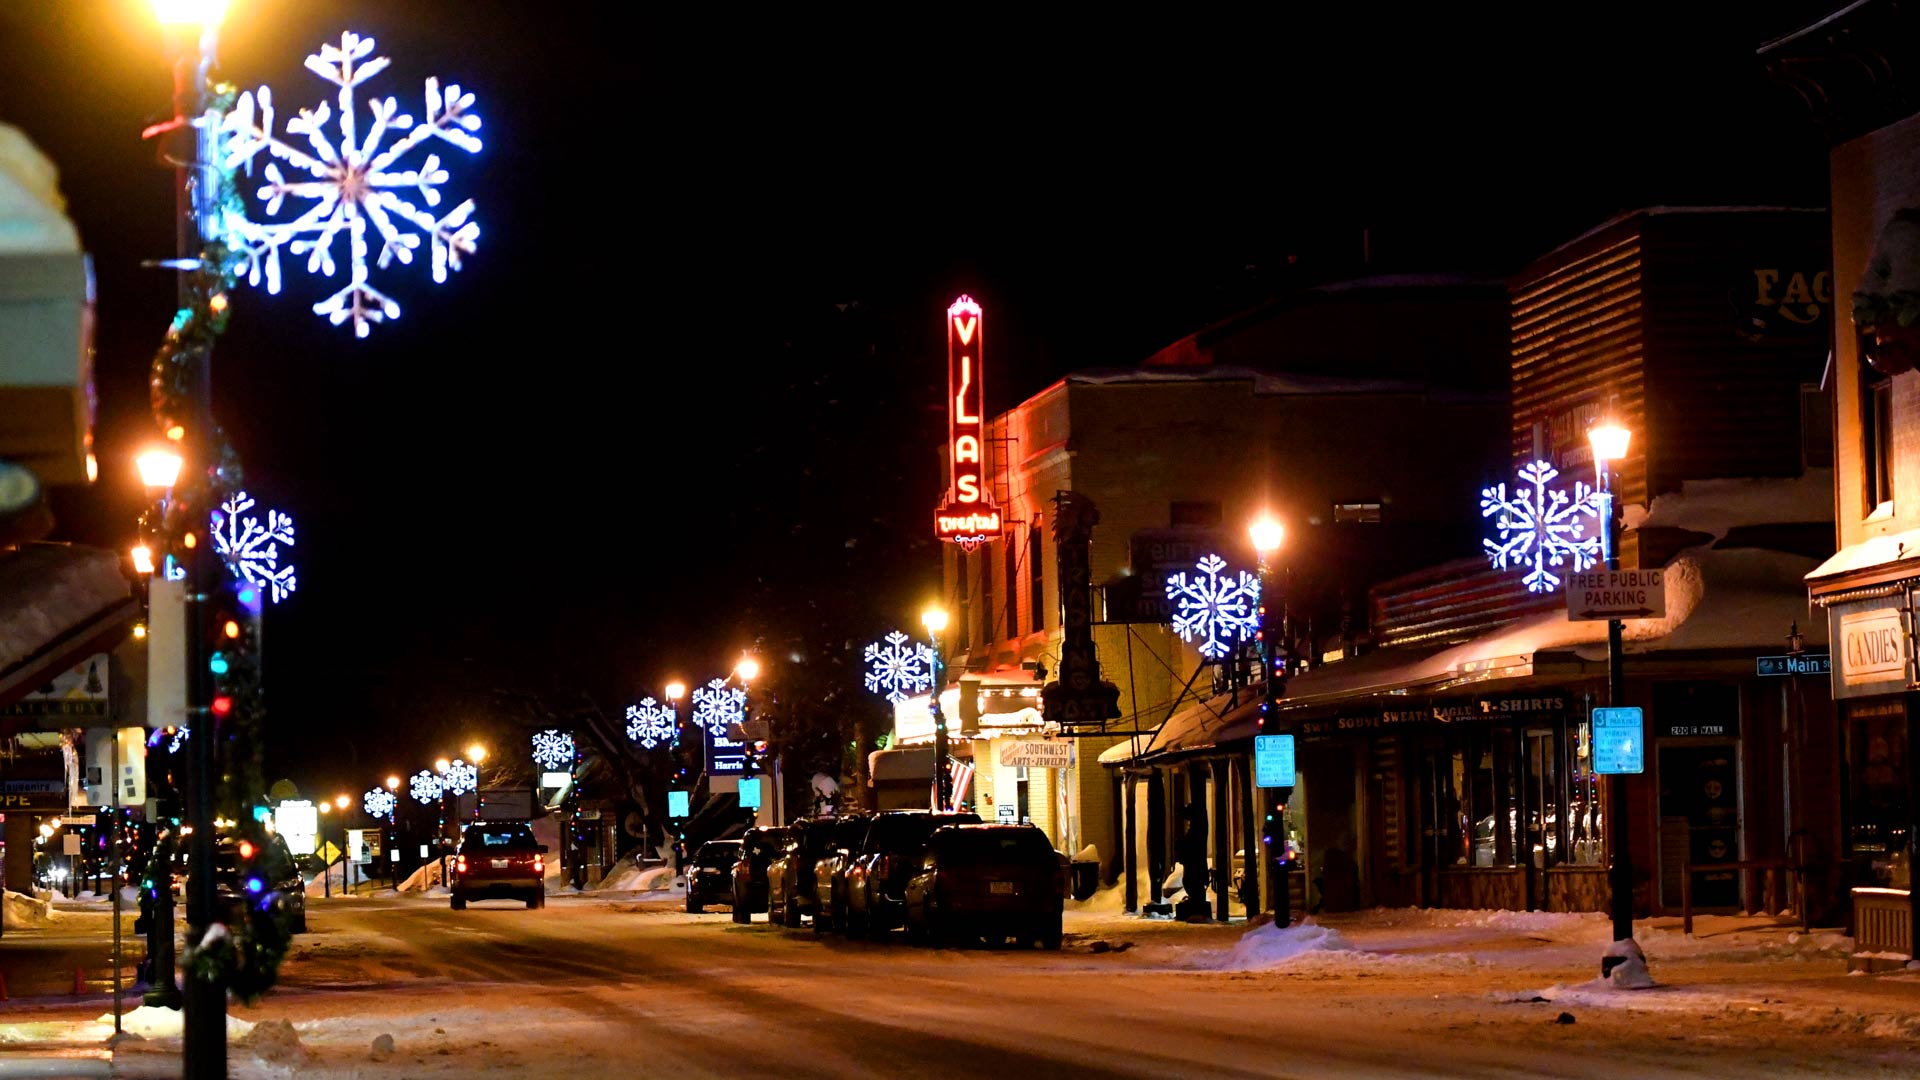 Downtown Eagler River Wisconsin at night.